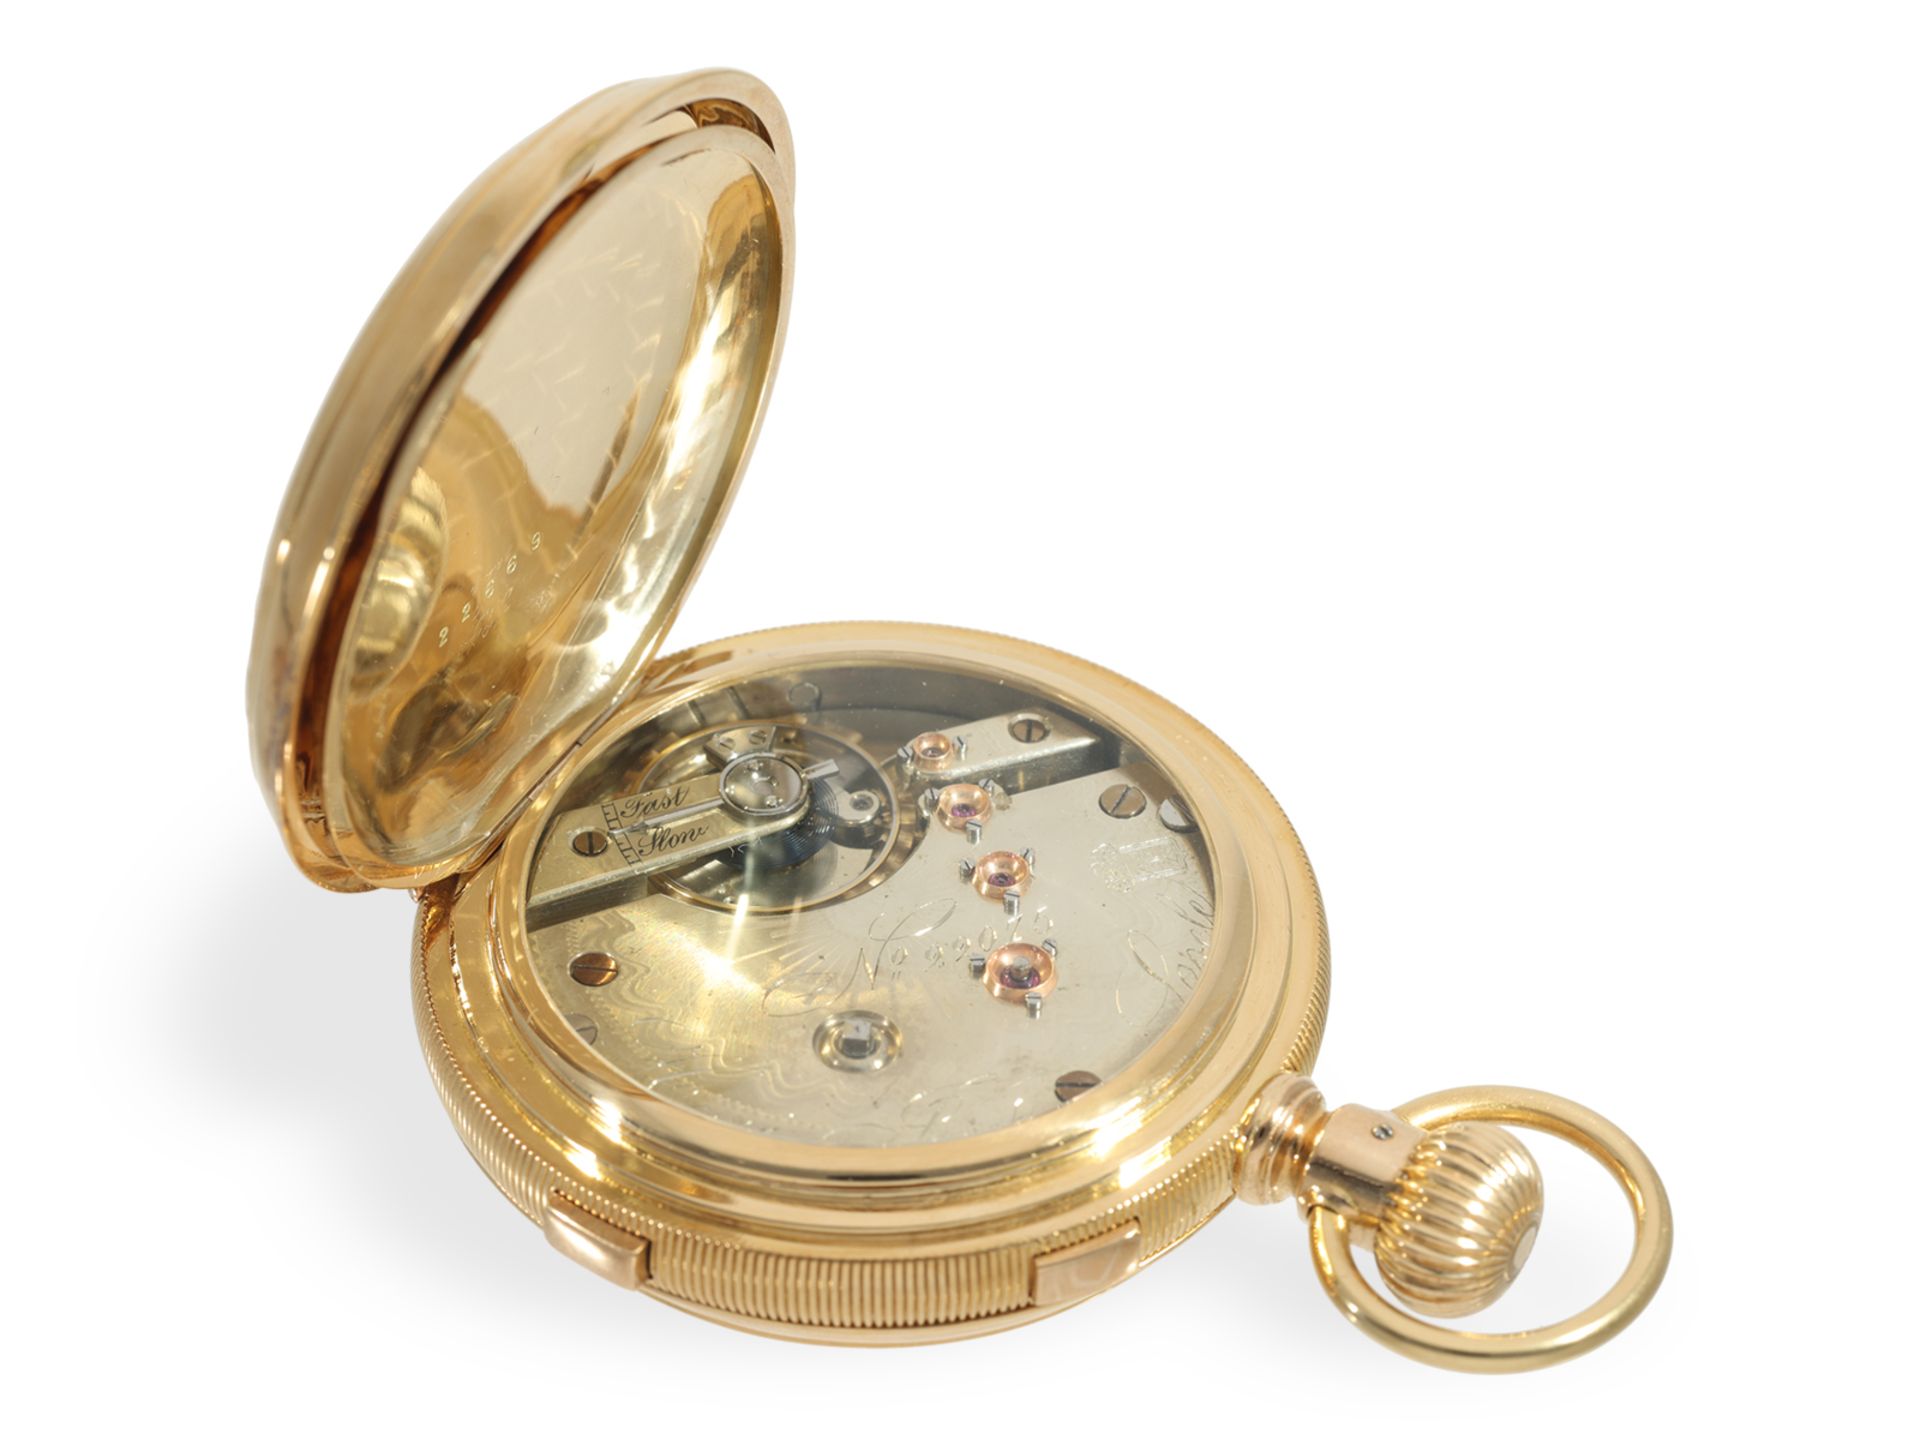 Pocket watch: very heavy gold hunting case watch with split-seconds chronograph, Ankerchronometer He - Image 5 of 8